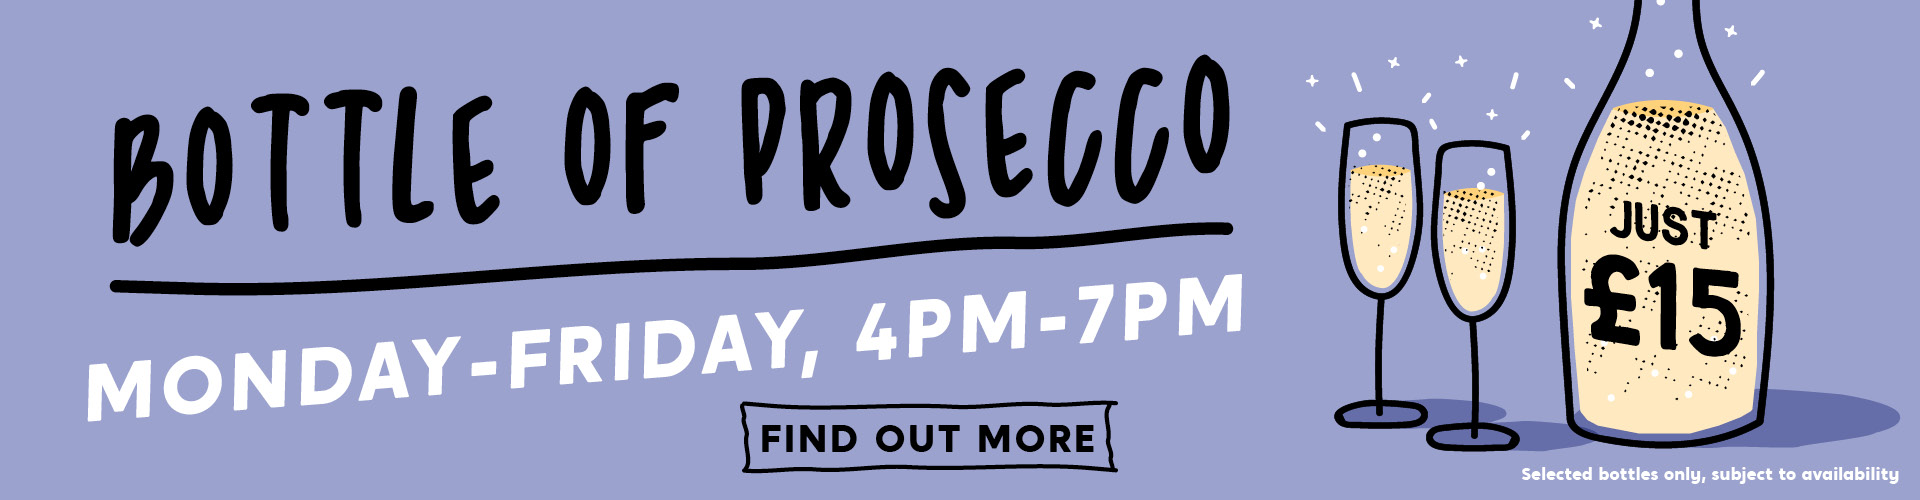 Bottle of Prosecco, Monday-Friday 4pm-7pm. £15 per bottle, subject to availability.